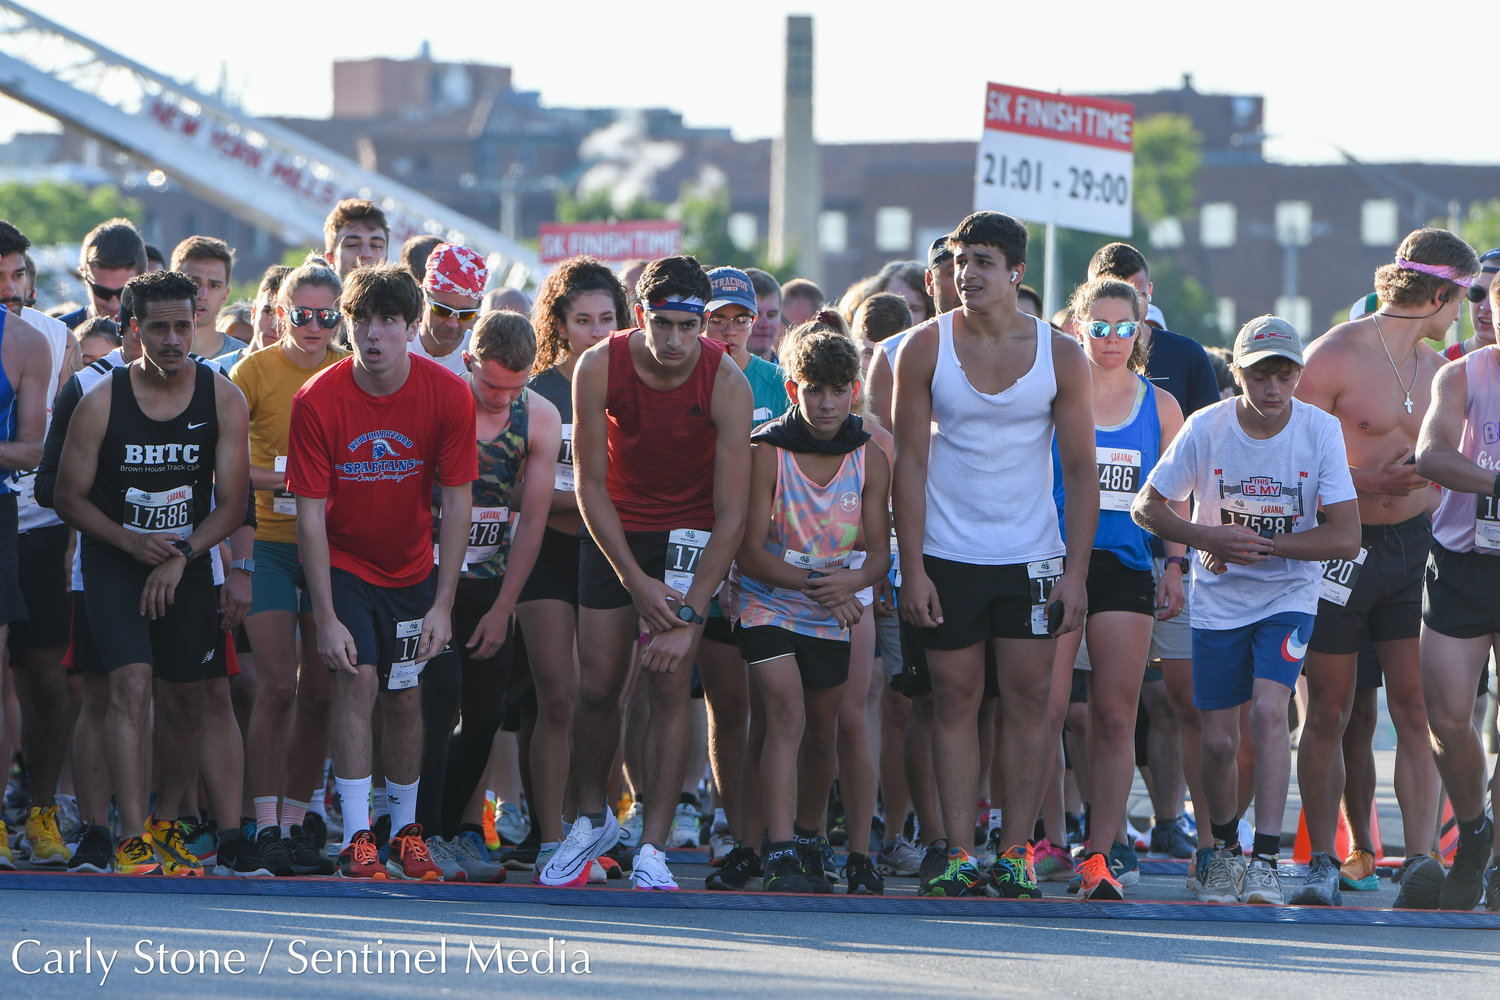 2022 Boilermaker 5K runners prepare to take off from the starting line on Burrstone Road in Utica on Sunday, July 10.